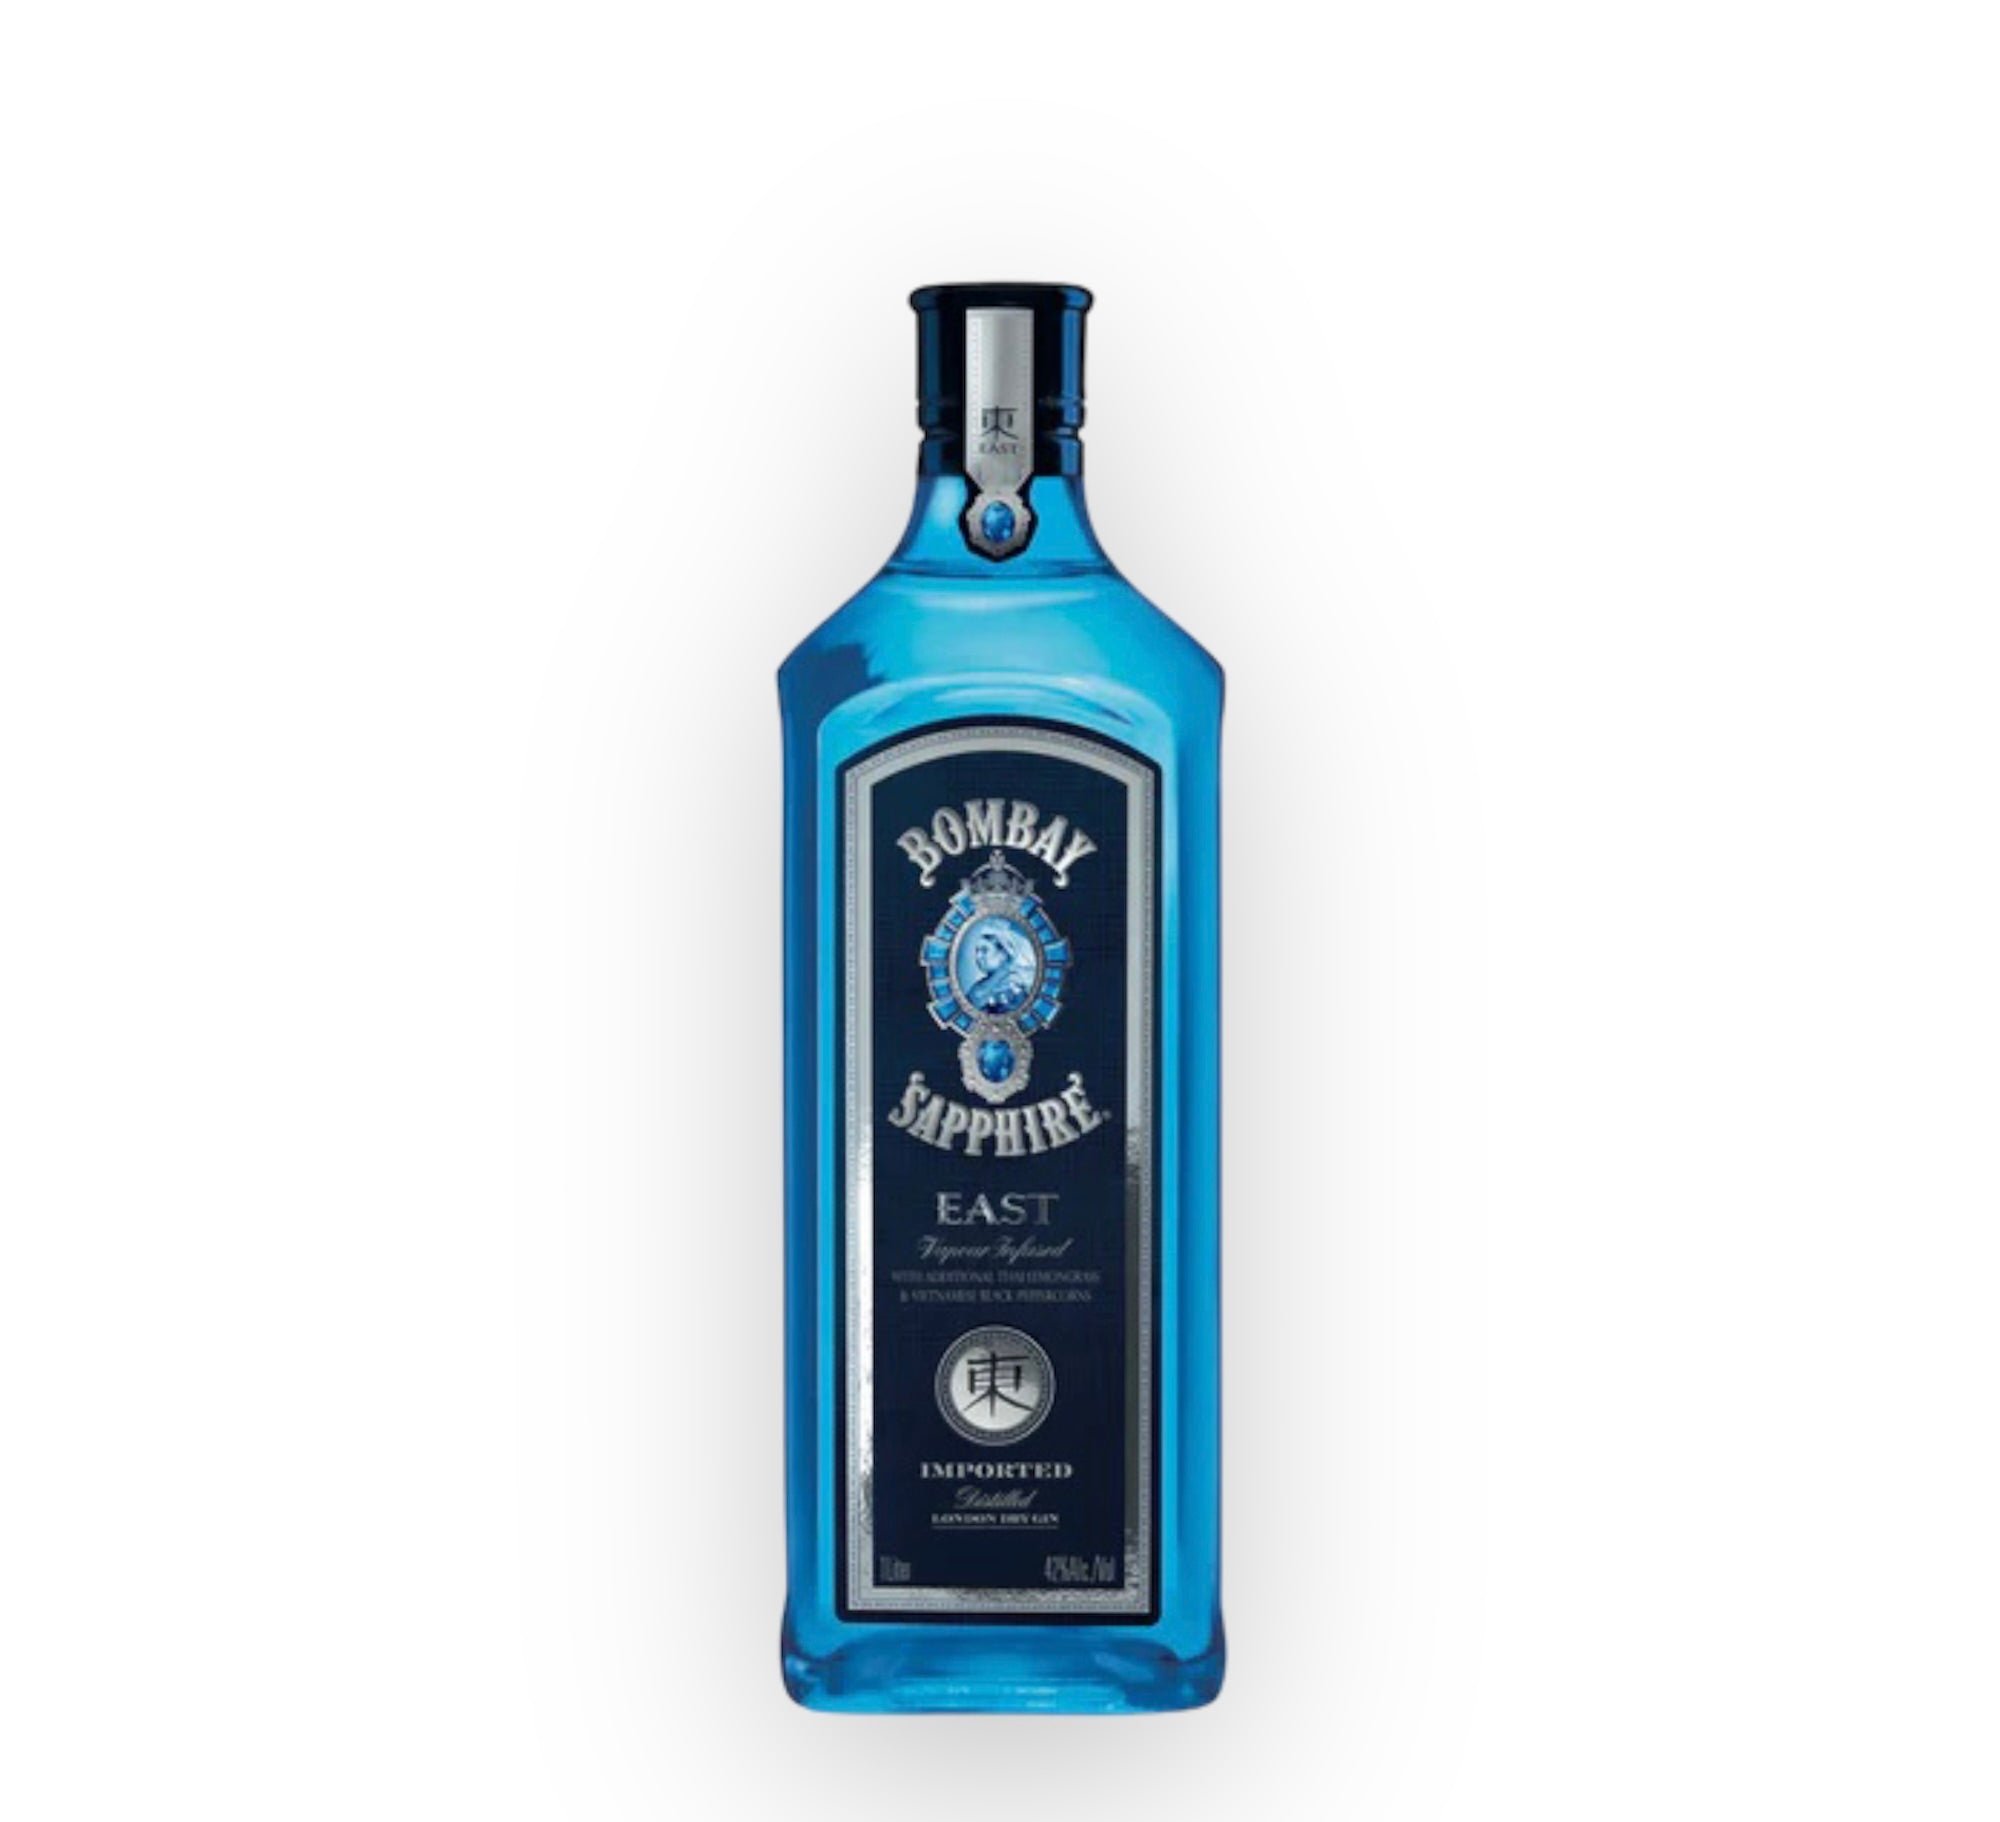 Bombay Gin Sapphire East 0.7l